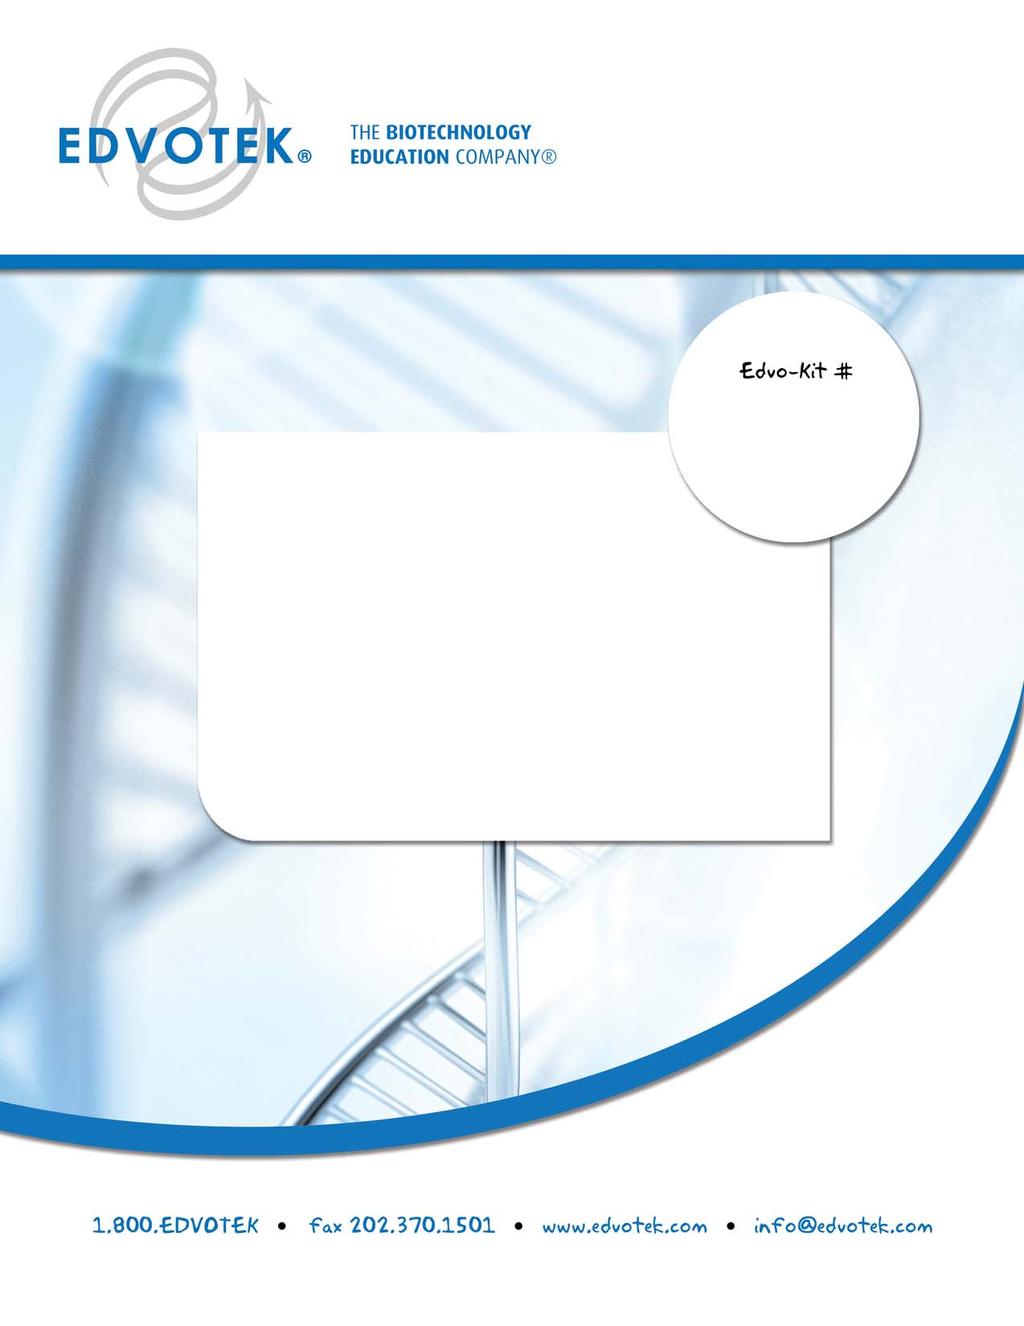 Edvo-Kit #S-52 S-52 The Secret of the Invisible DN: Genetics Exploration Experiment Objective: In this experiment, students will explore agarose gel electrophoresis by